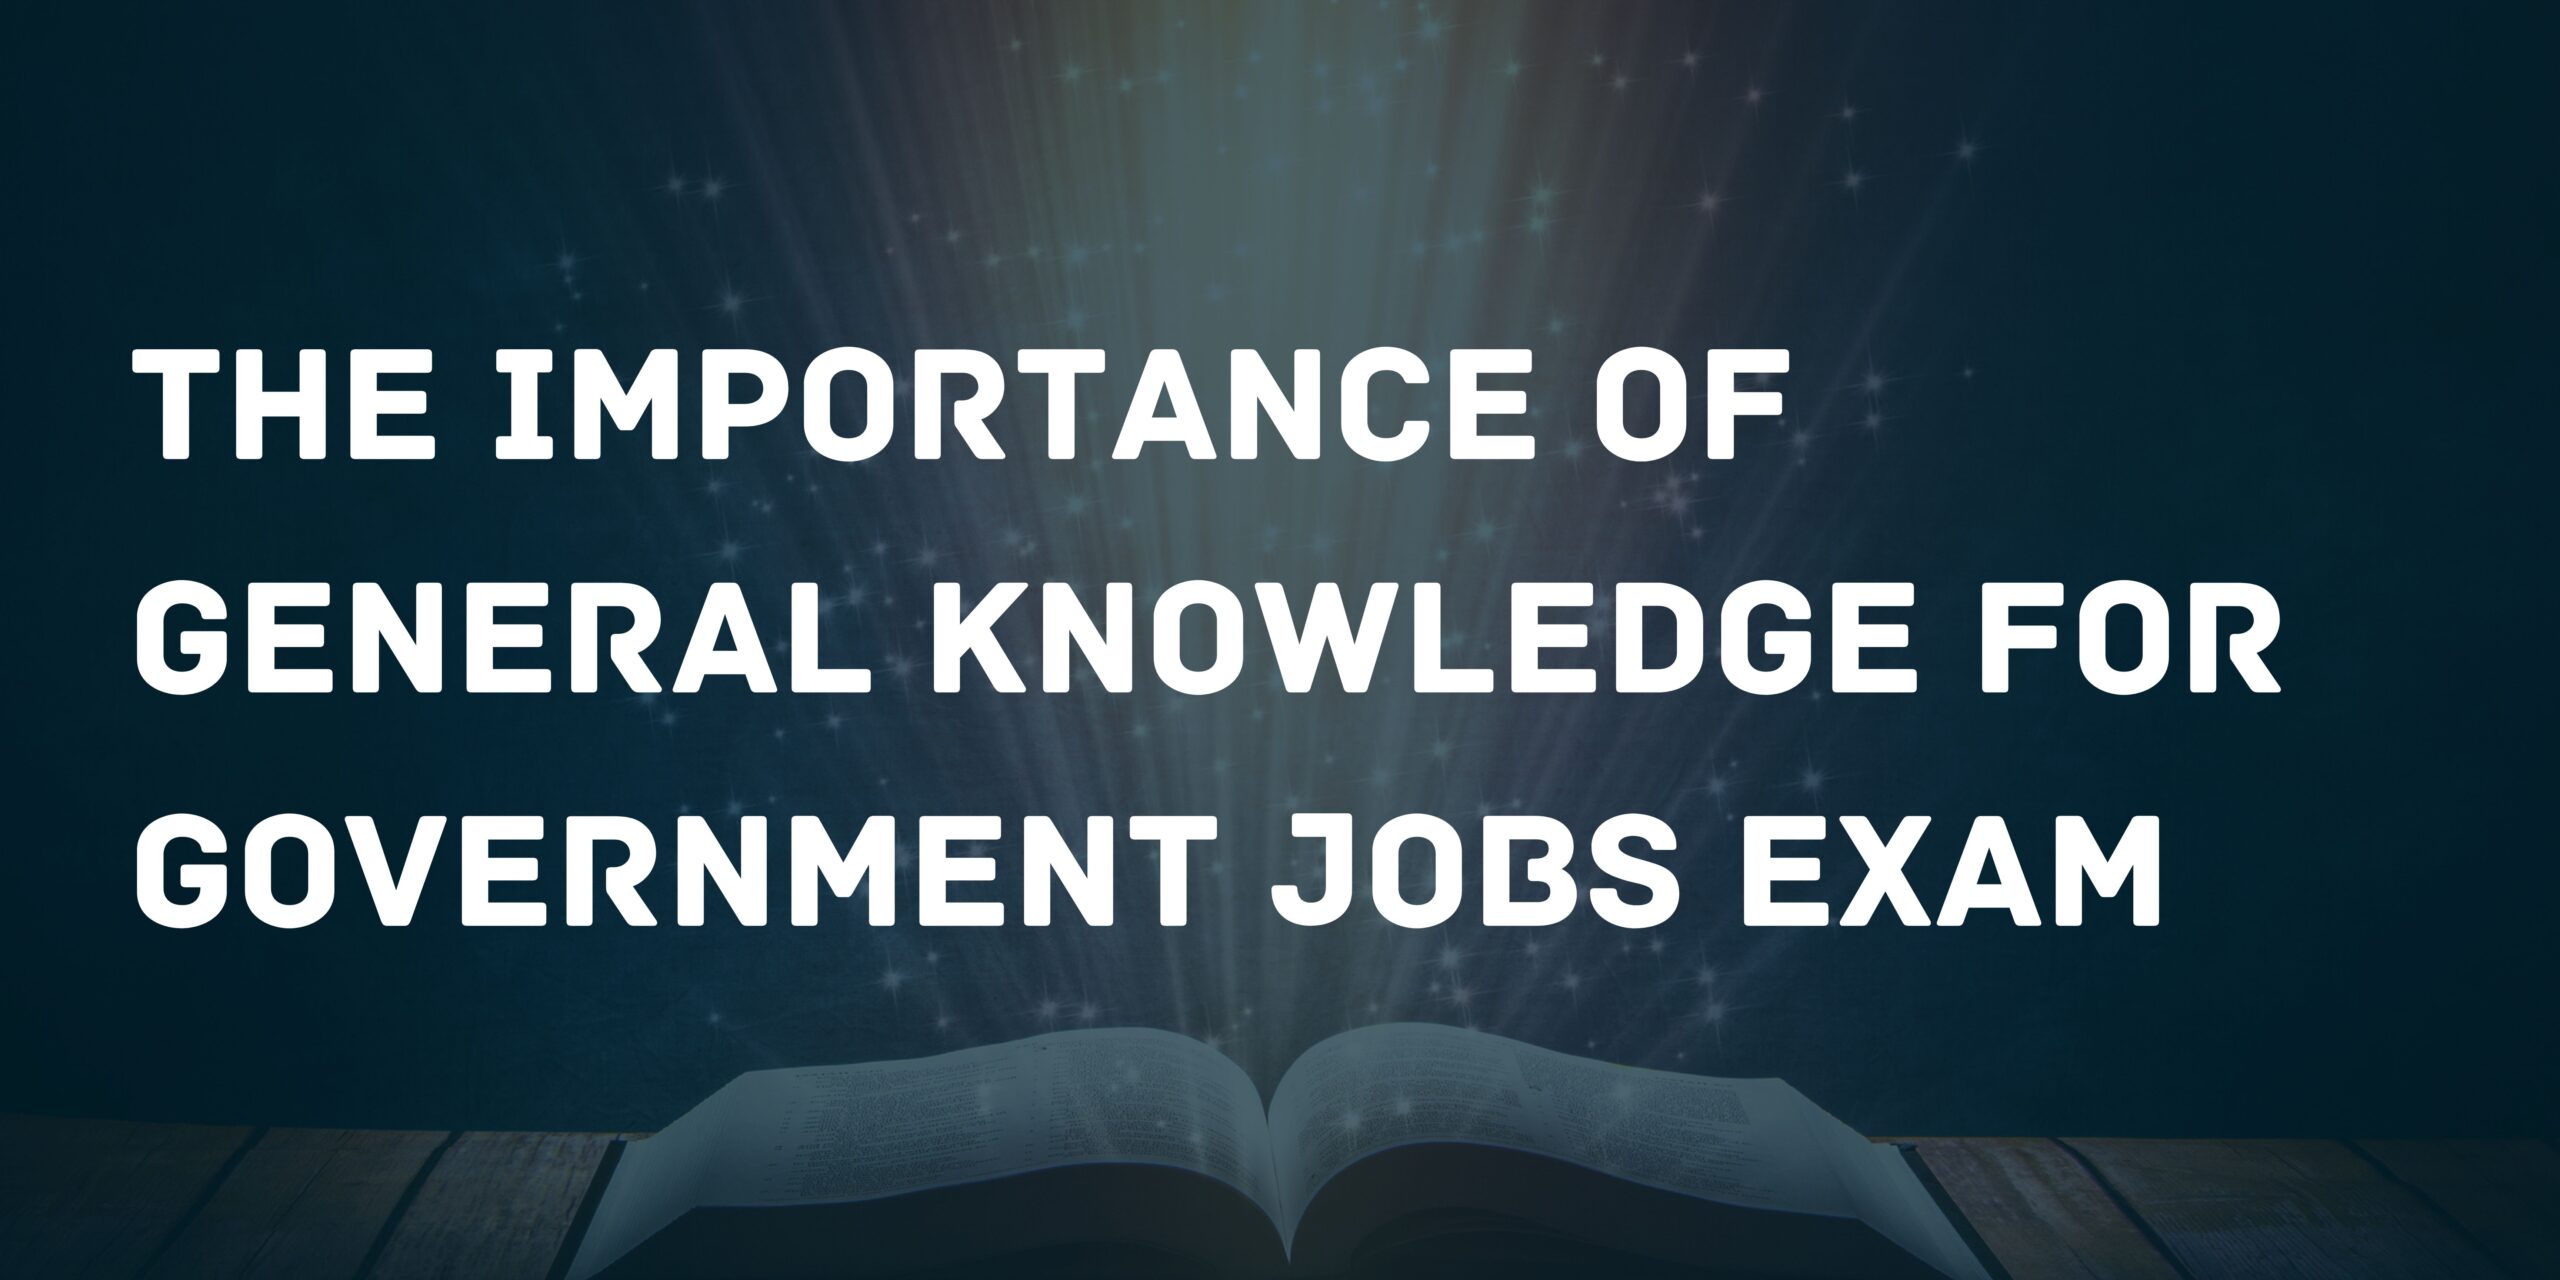 The Importance of General Knowledge for Government Jobs Exam